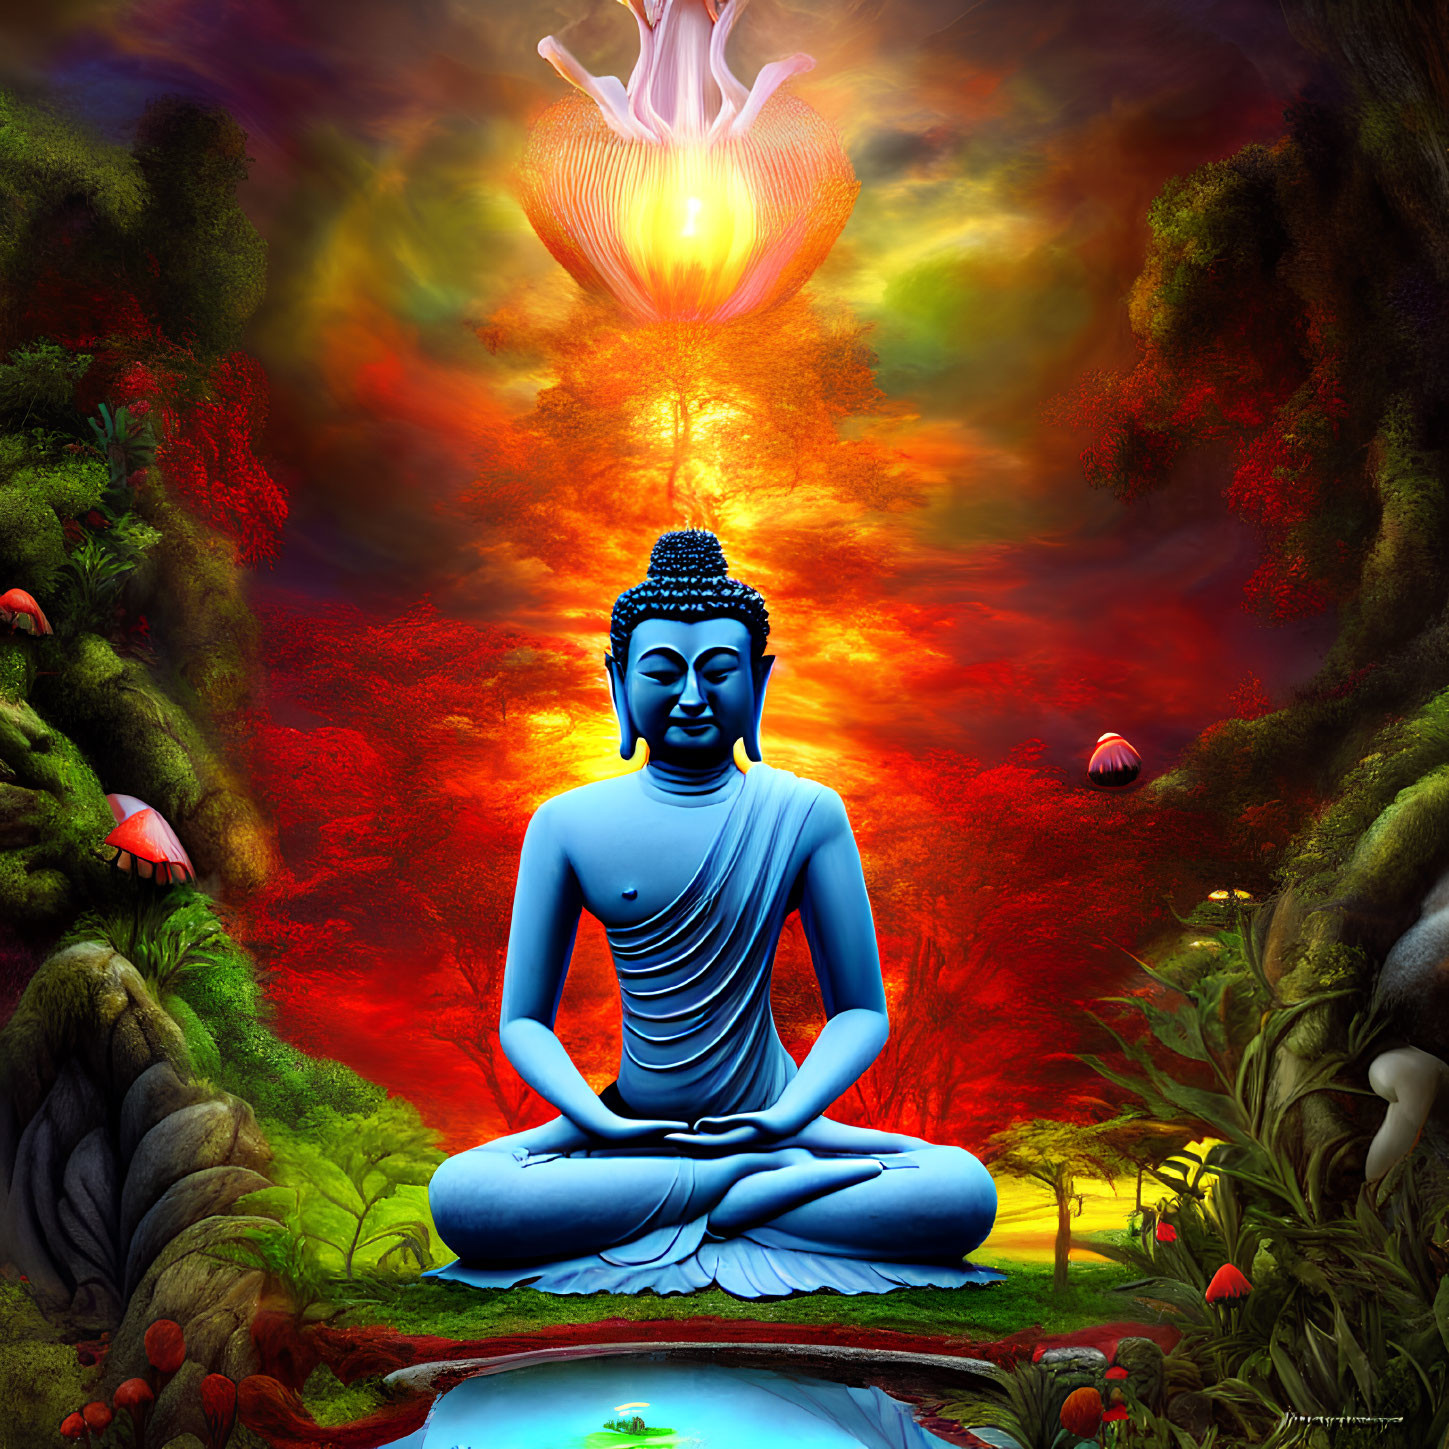 Tranquil Buddha meditation scene by reflective pond with glowing lotus in mystical setting